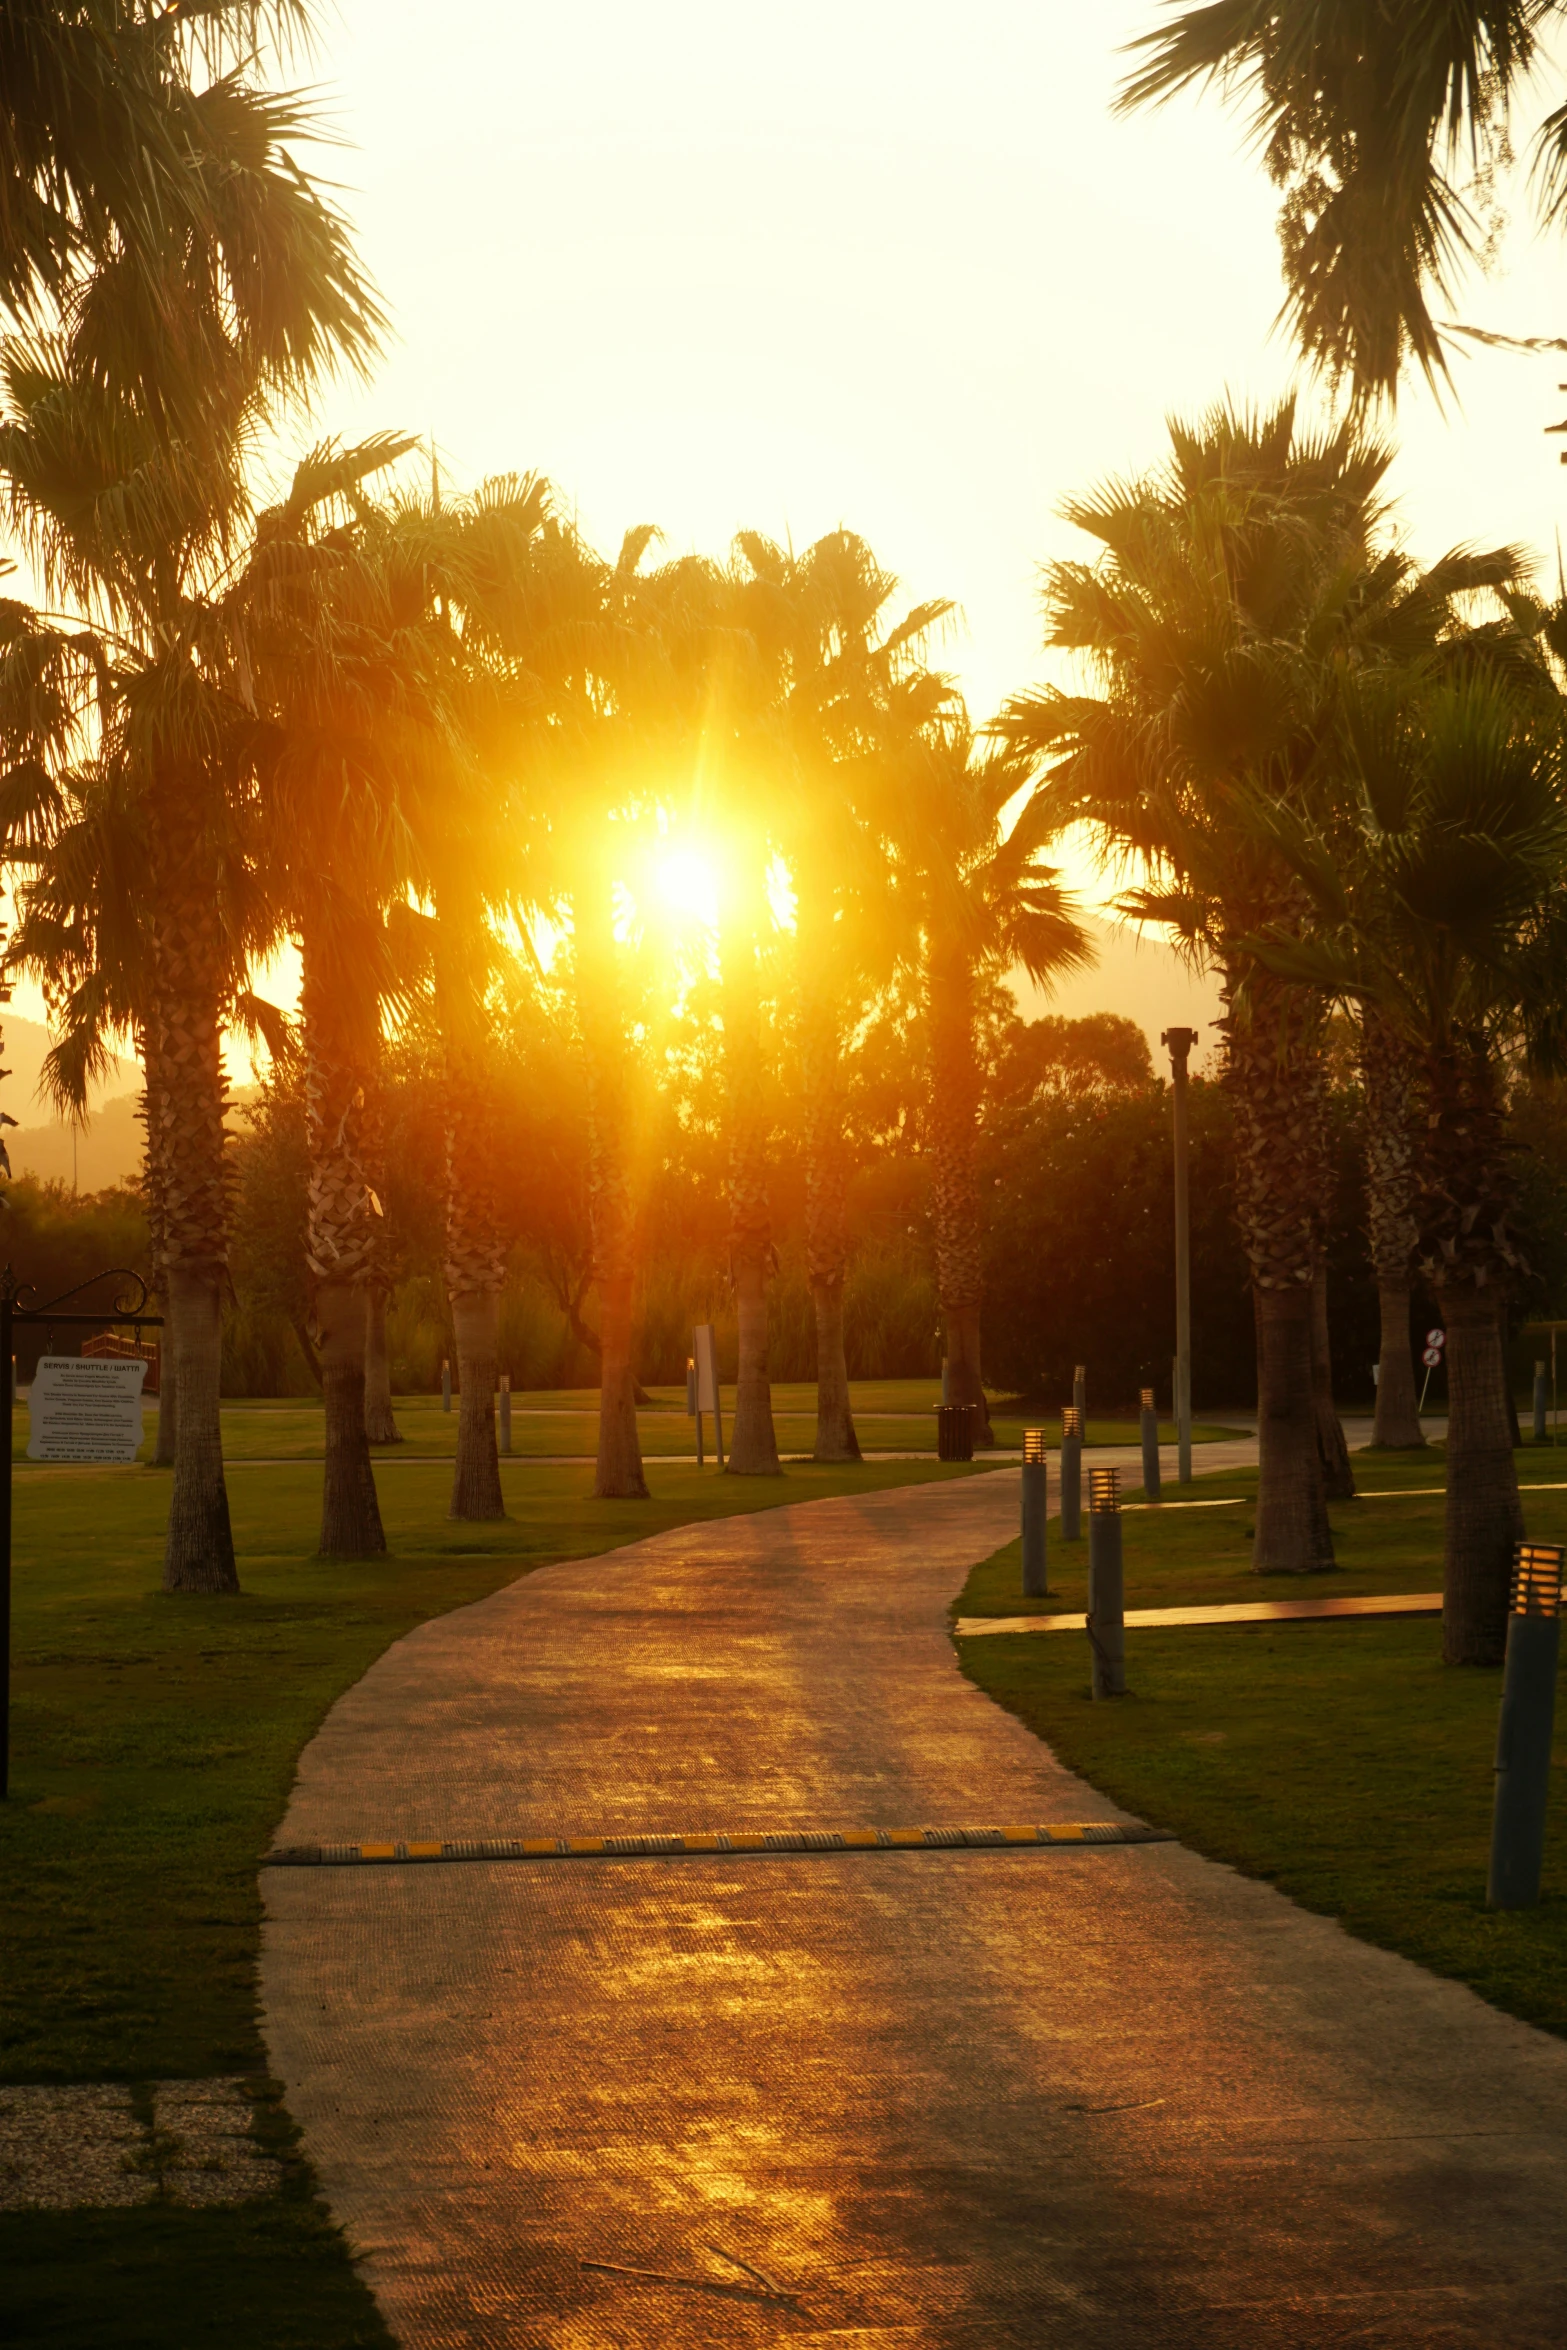 a trail going through a park with palm trees around